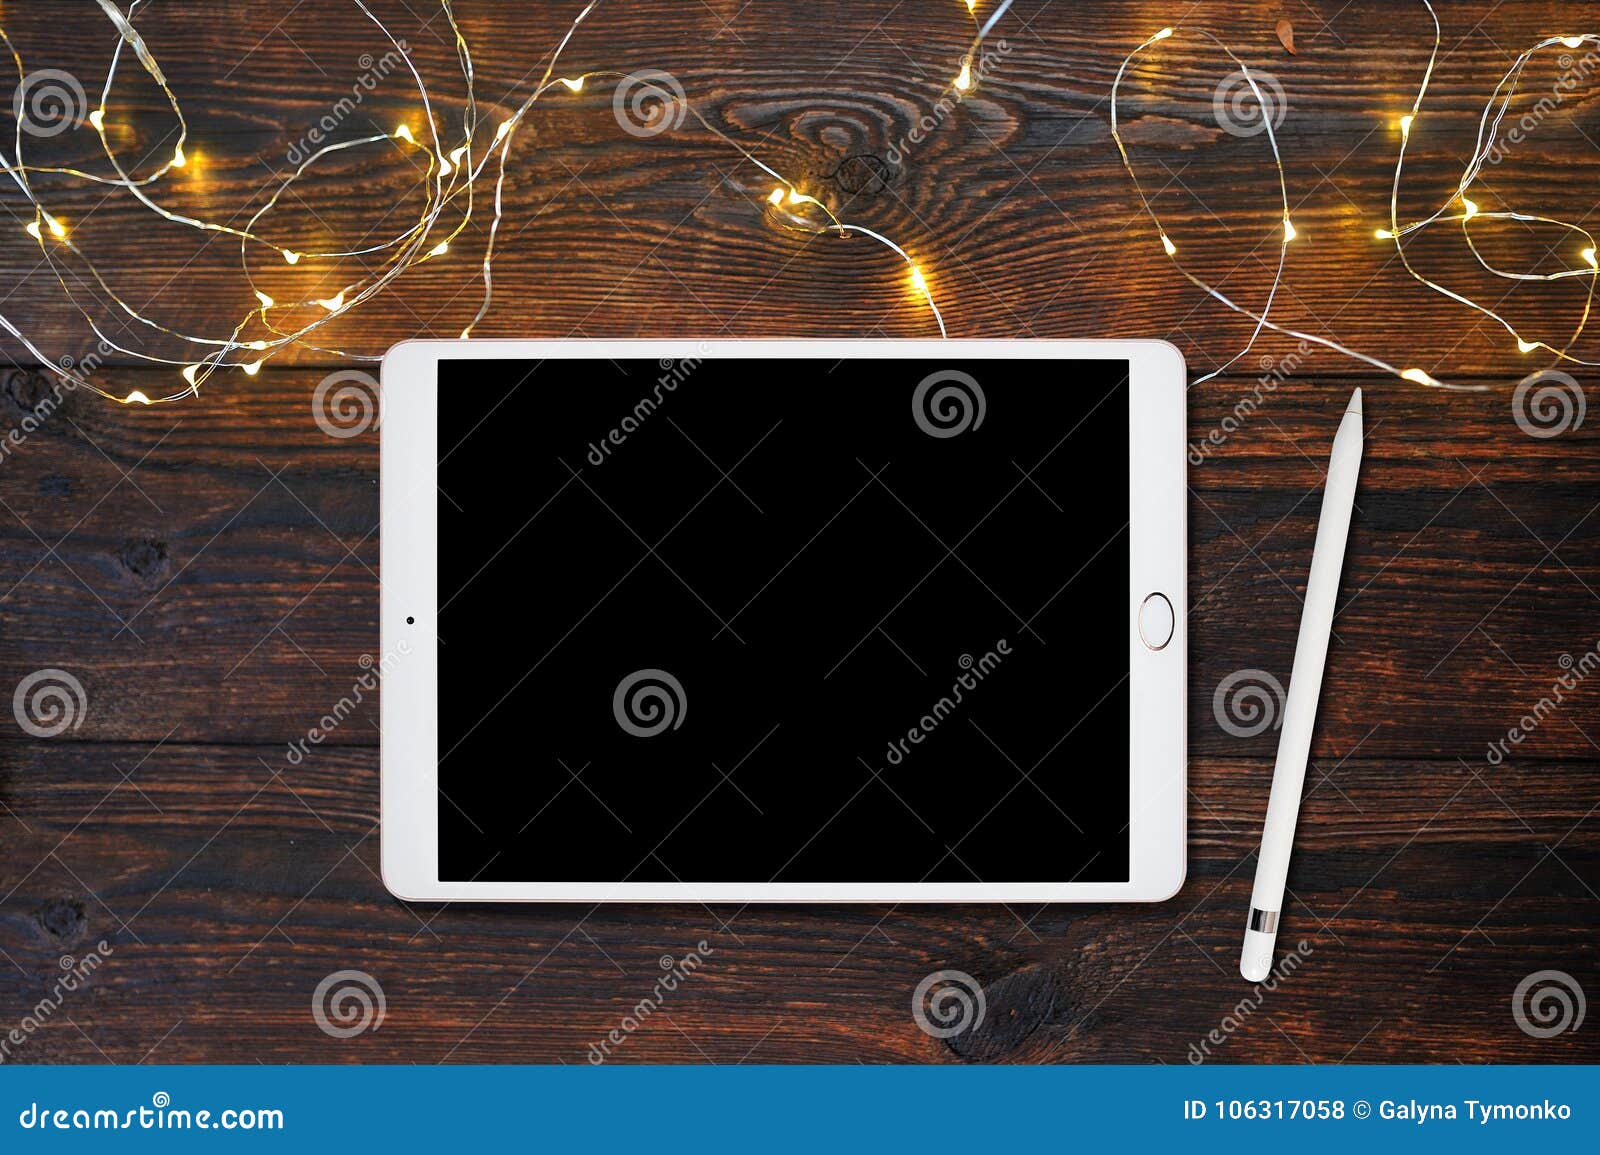 mockup tablet computer and pencil on old wooden table with garland, flatlay on a white wooden background, with place for your text